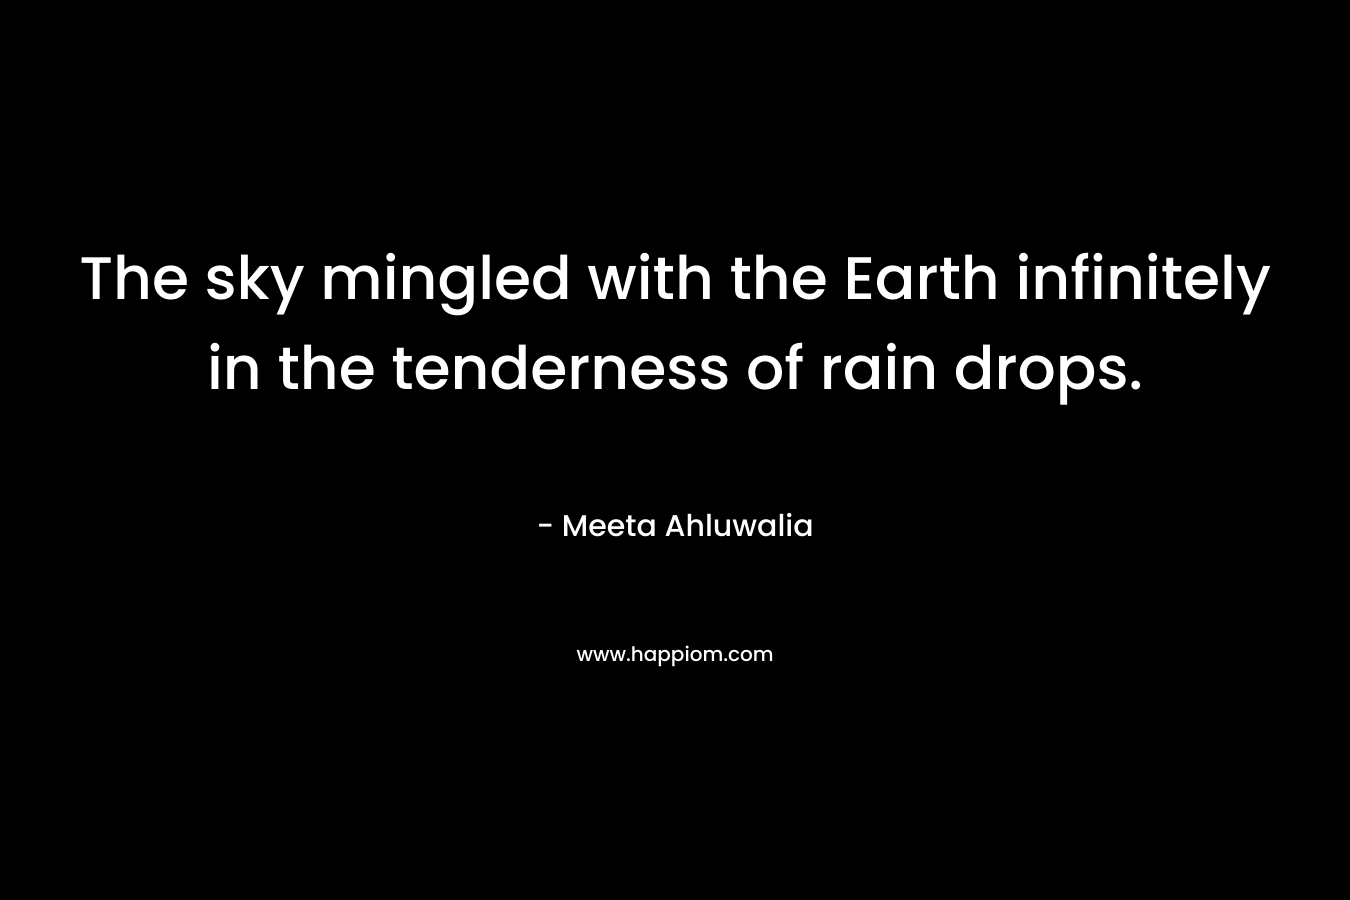 The sky mingled with the Earth infinitely in the tenderness of rain drops.